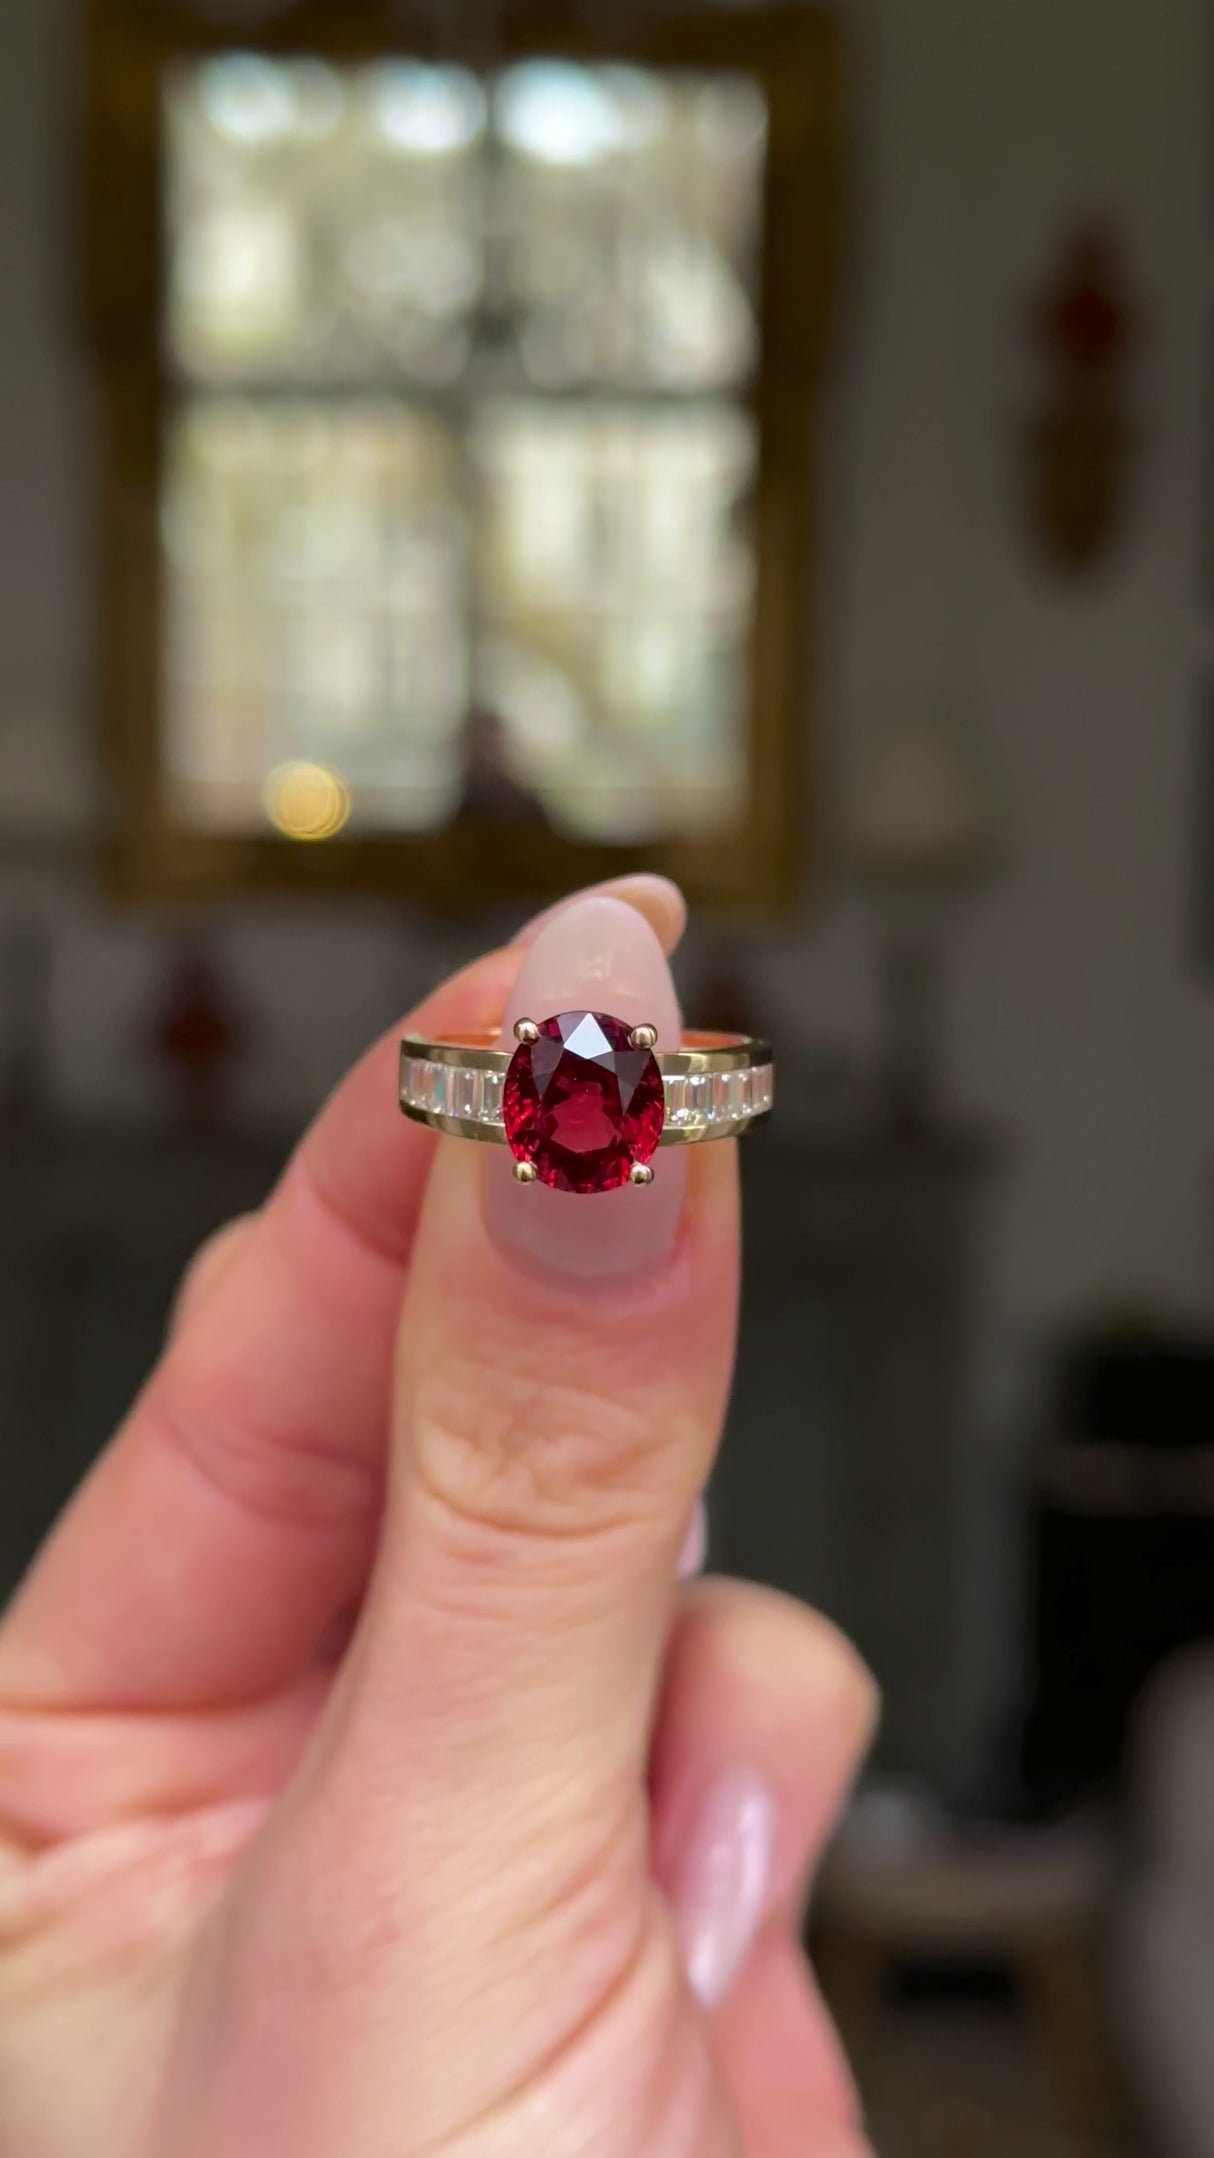 Art Deco spinel and diamond ring held in fingers and moved around to give perspective.